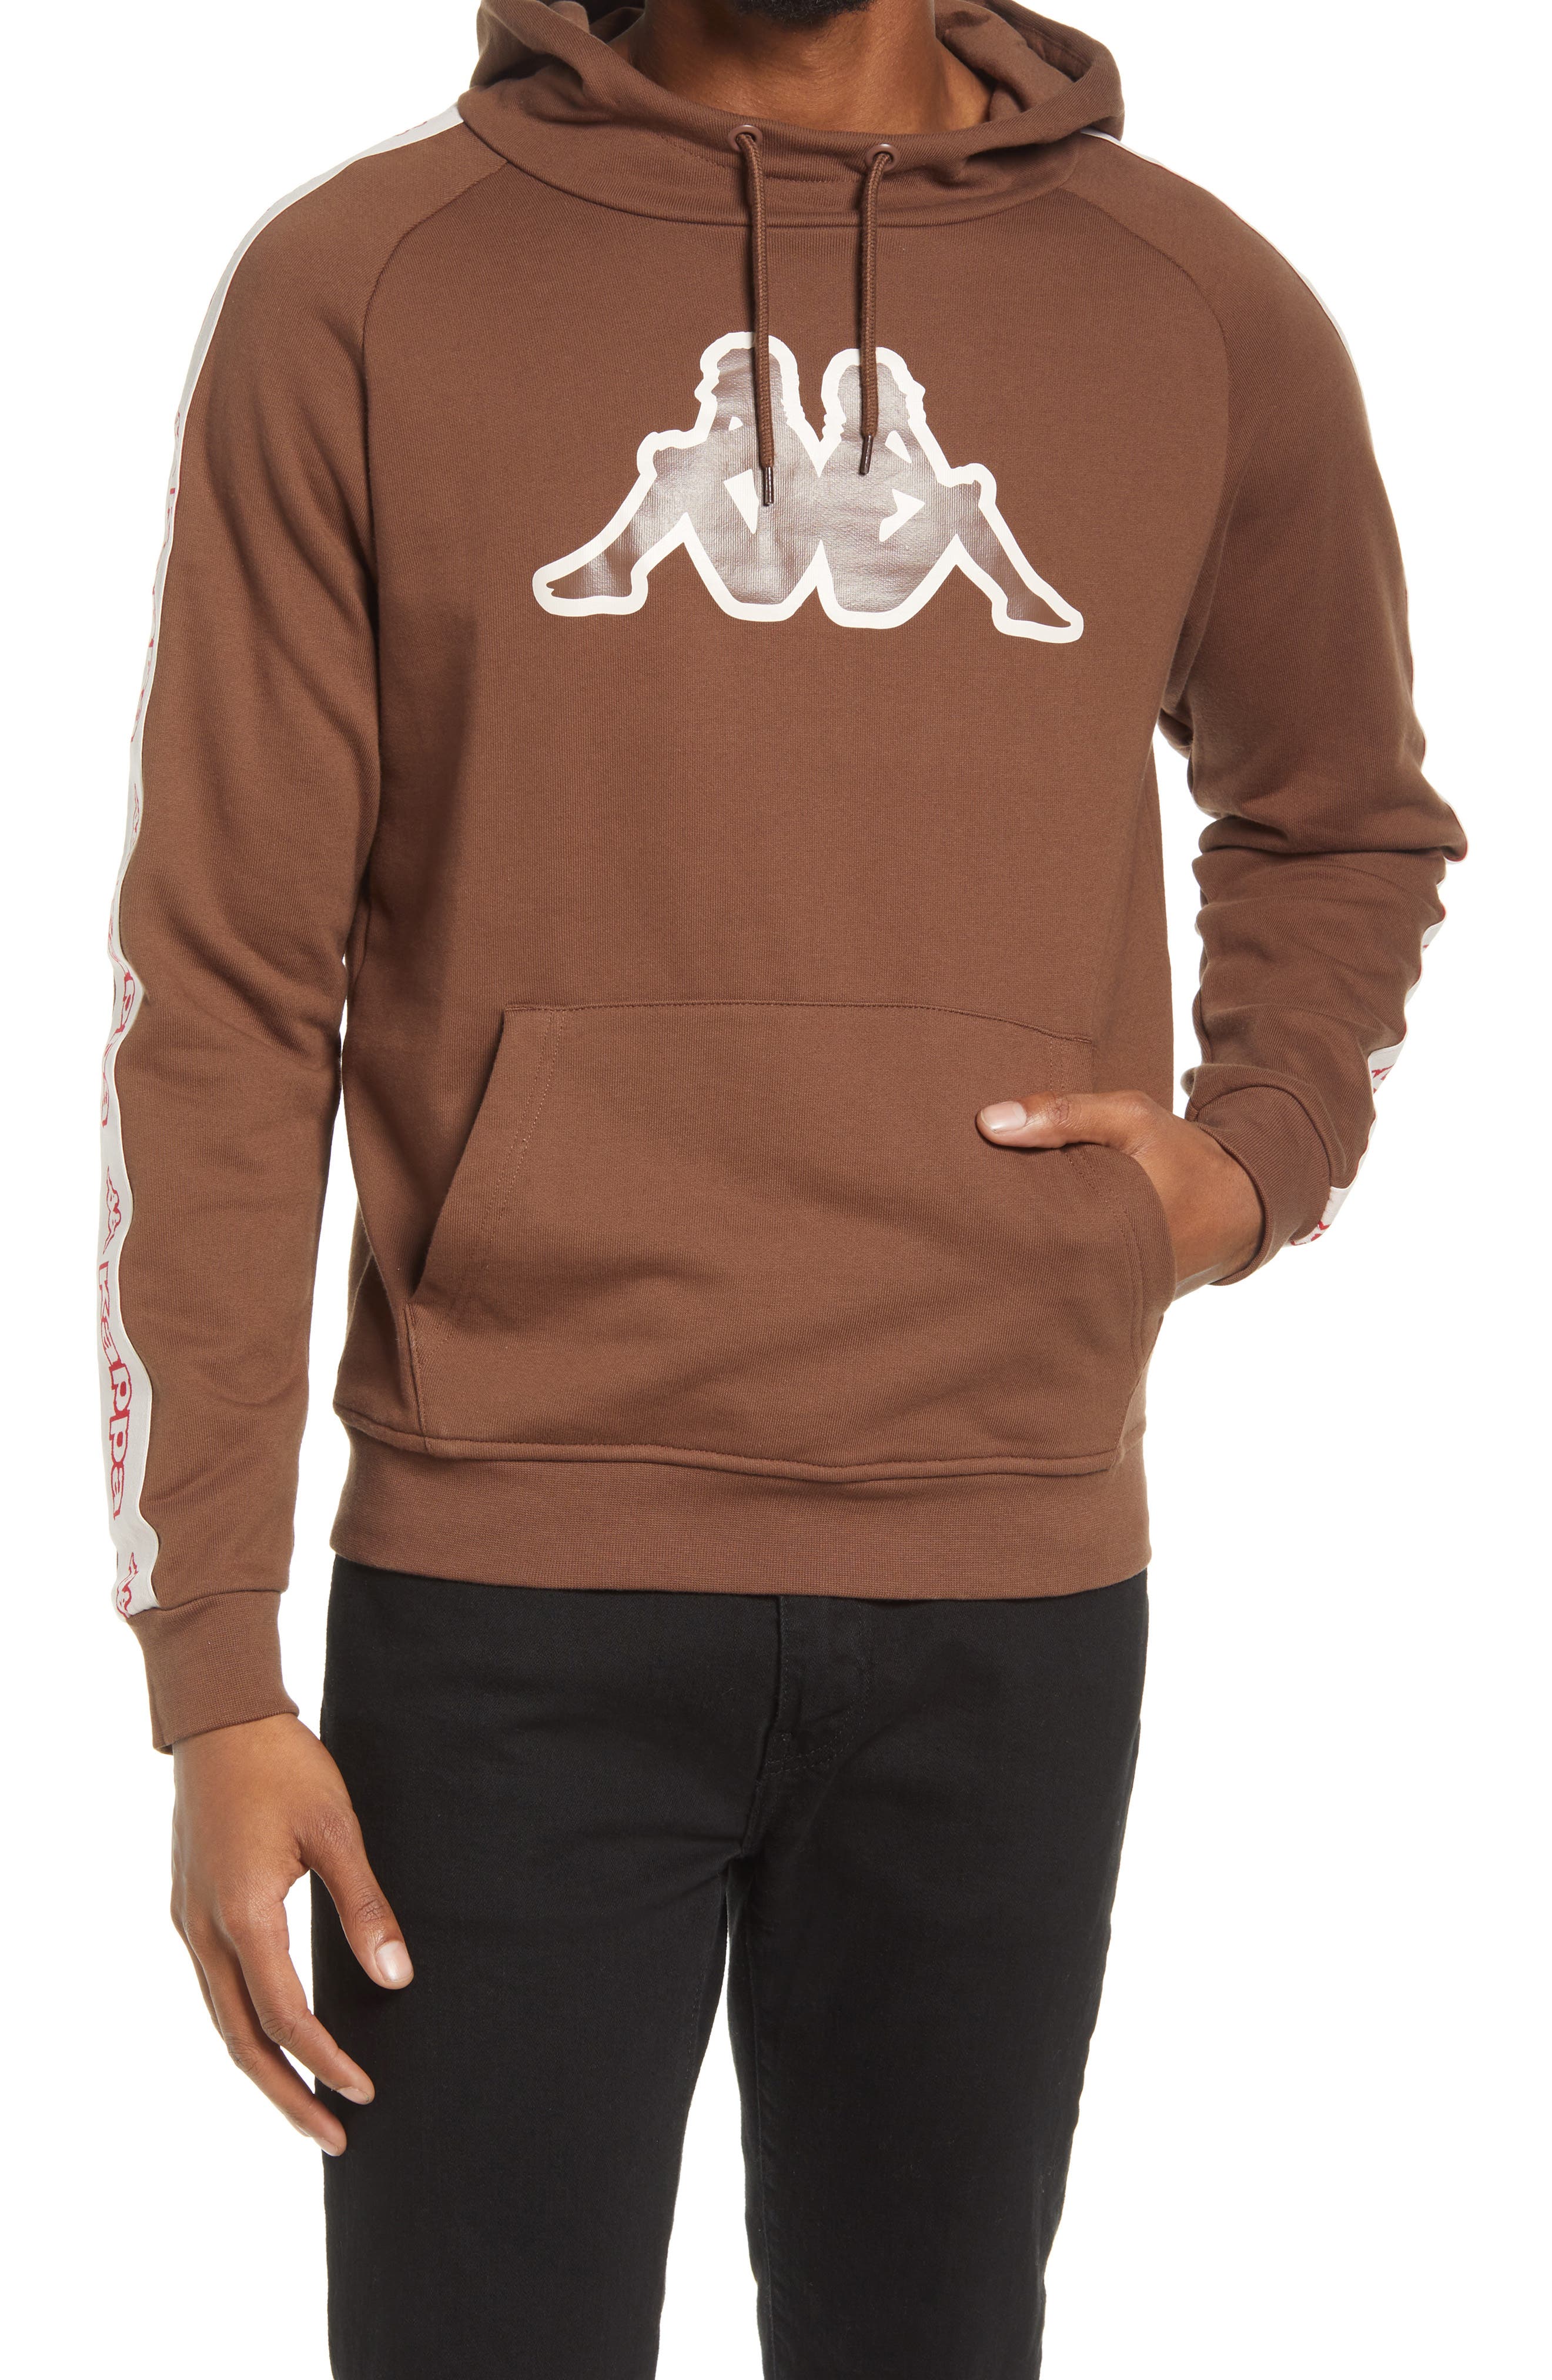 Kappa Logo Tape Hoodie in Brown-Pink-Red Cherry at Nordstrom, Size Small